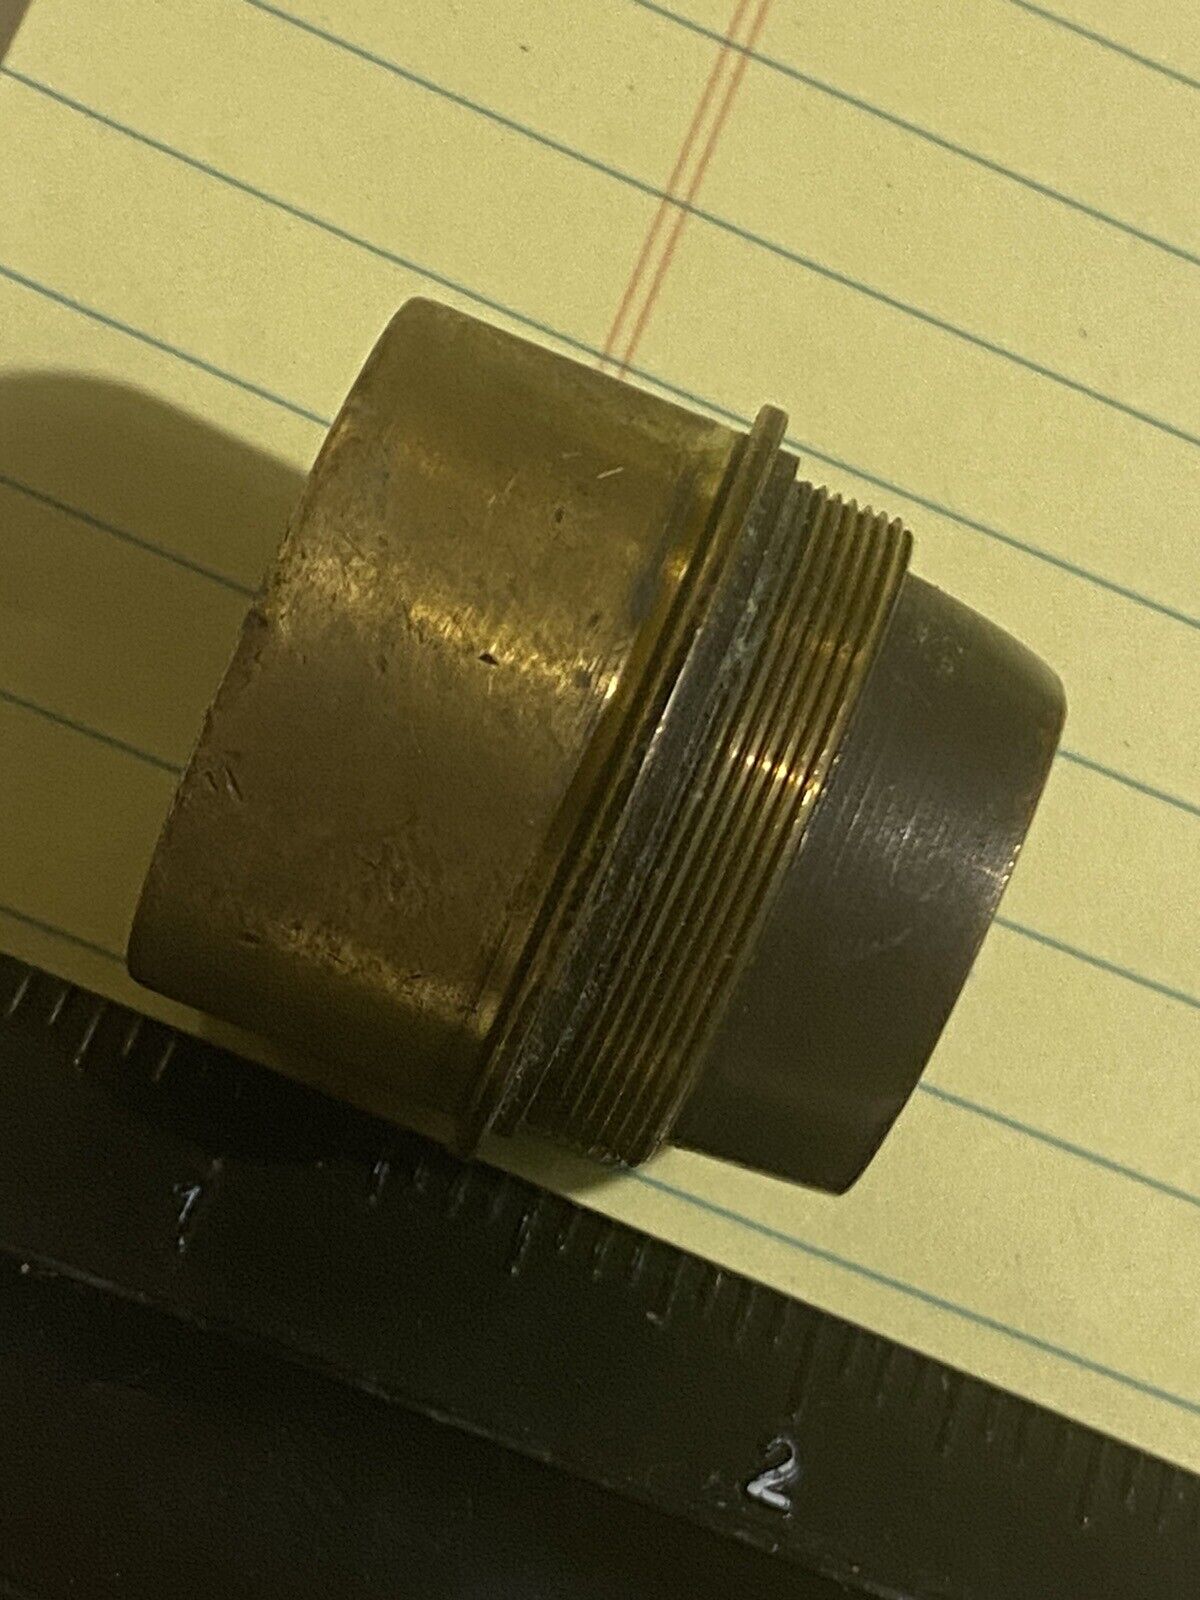 VINTAGE BRASS AND GLASS LENS PIECE- MICROSCOPE OR TELESCOPE LENS PART?